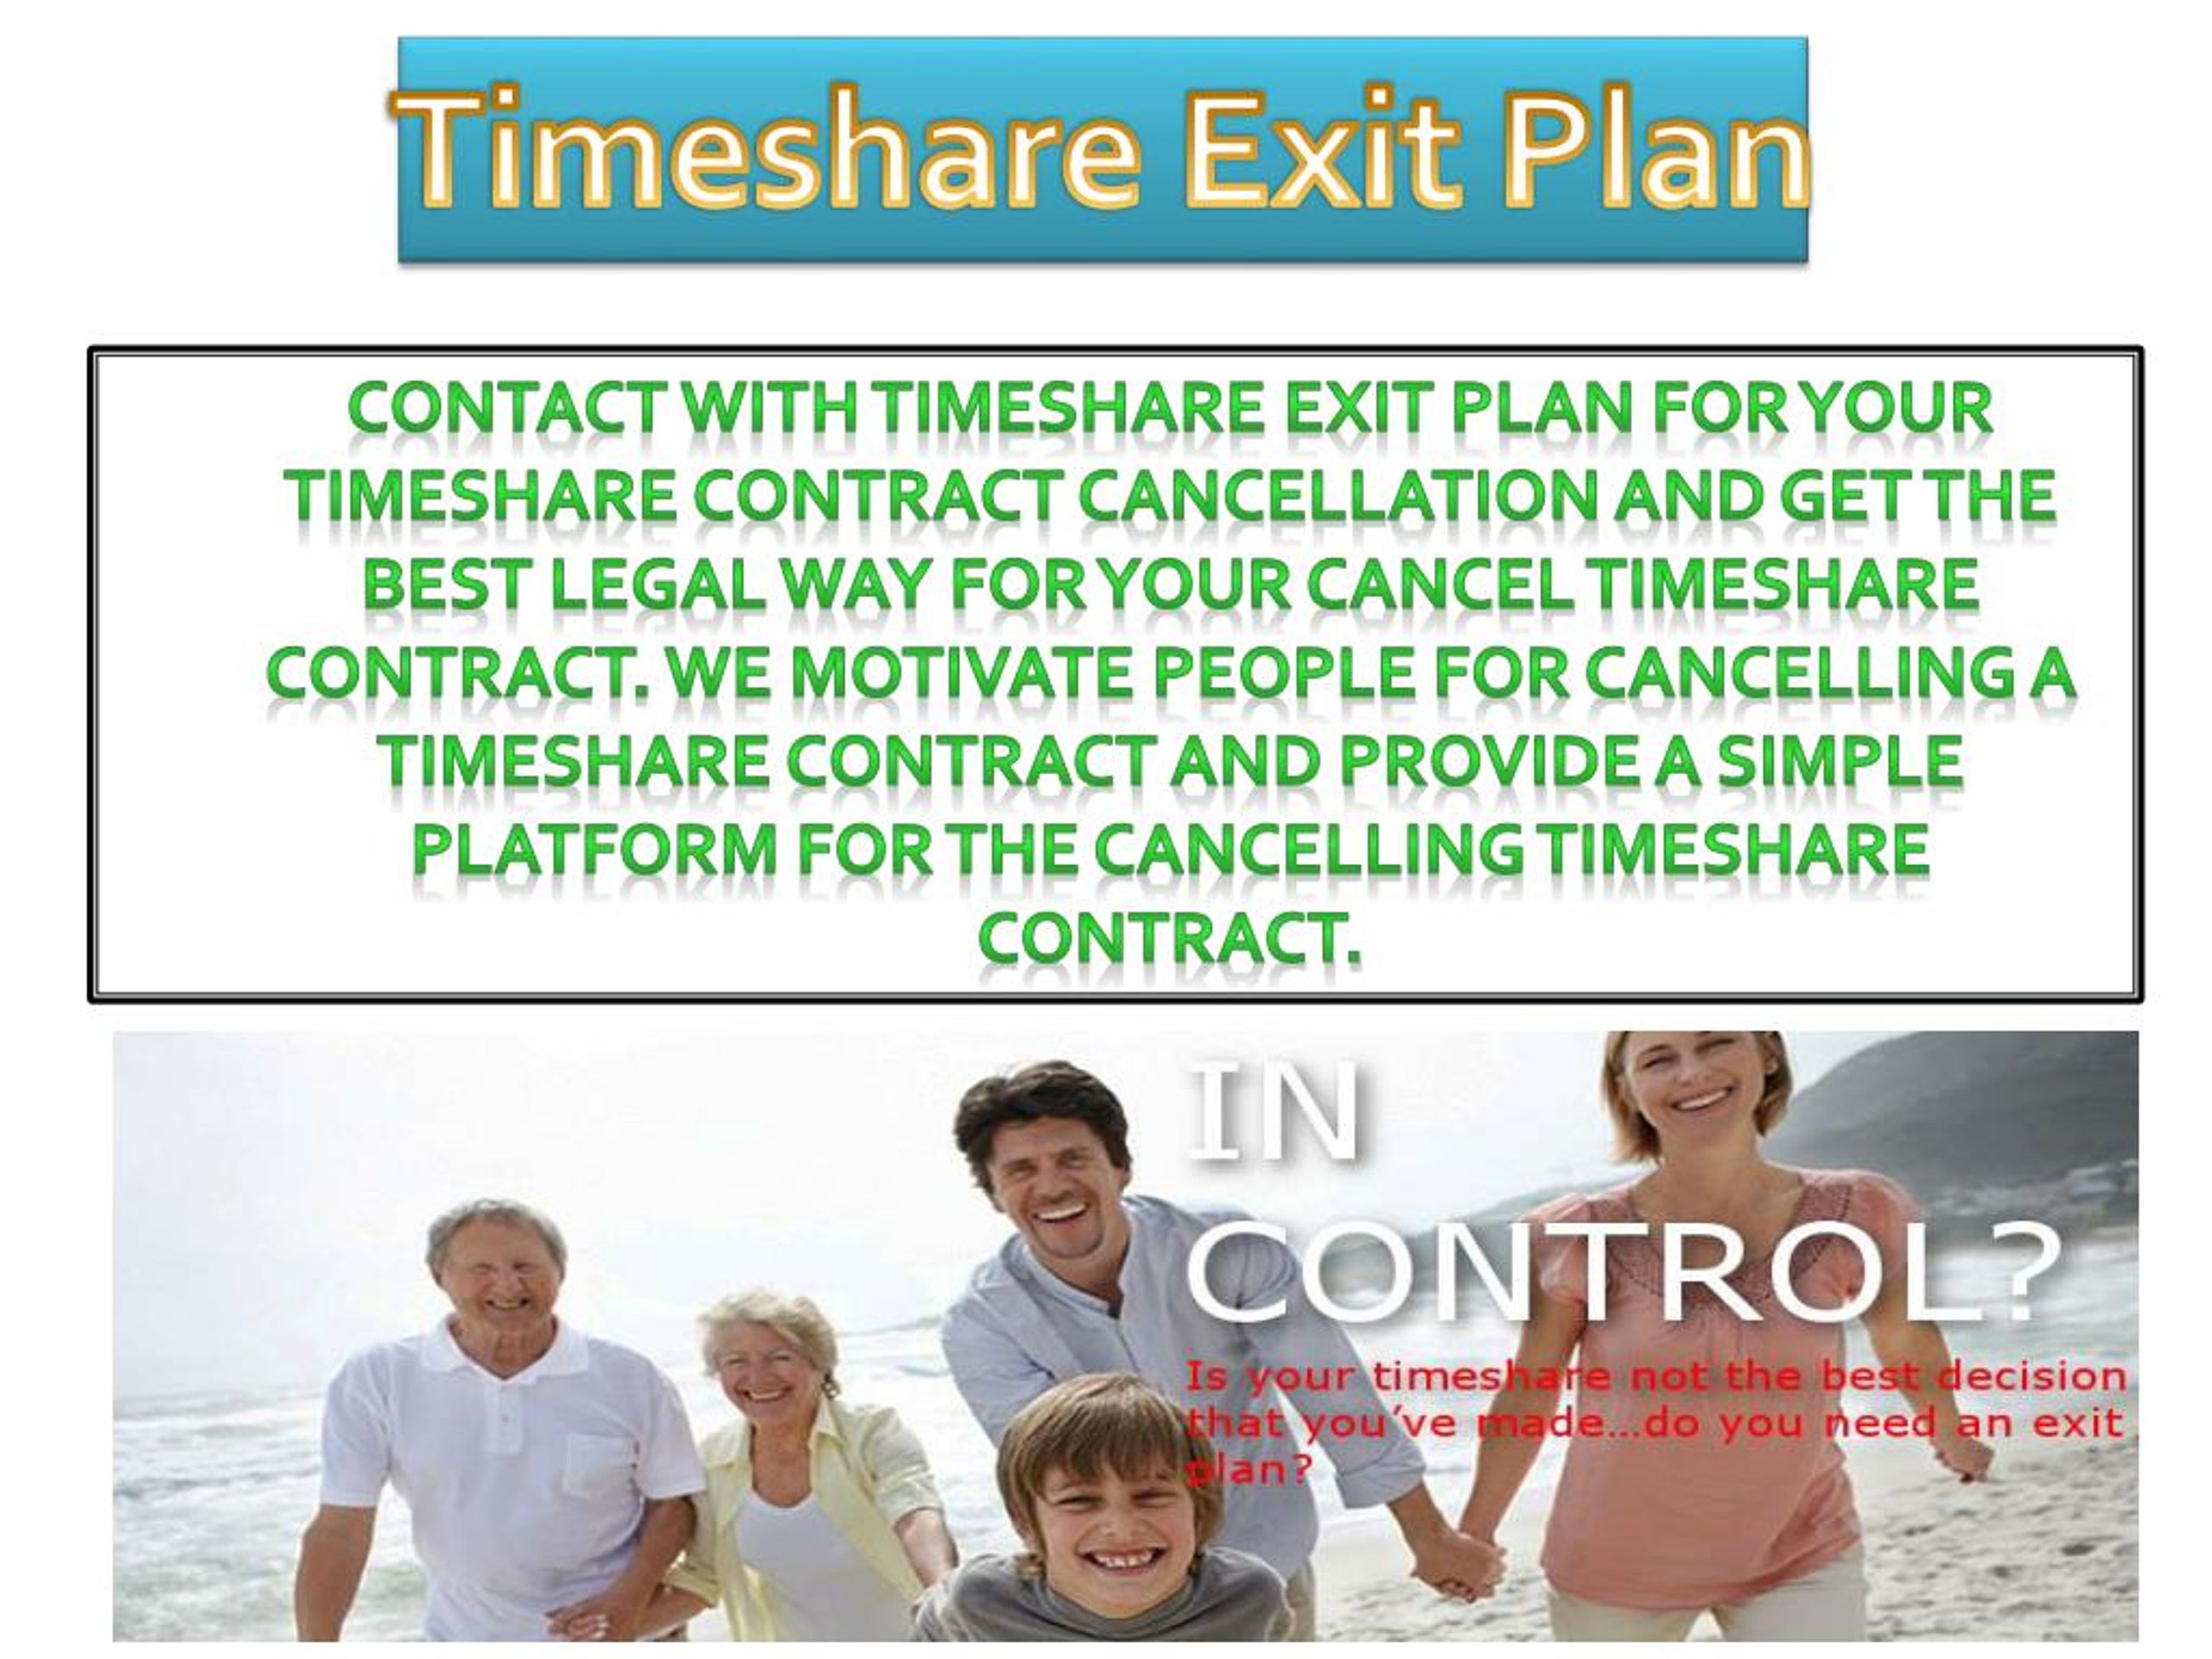 how to get out of timeshare presentation